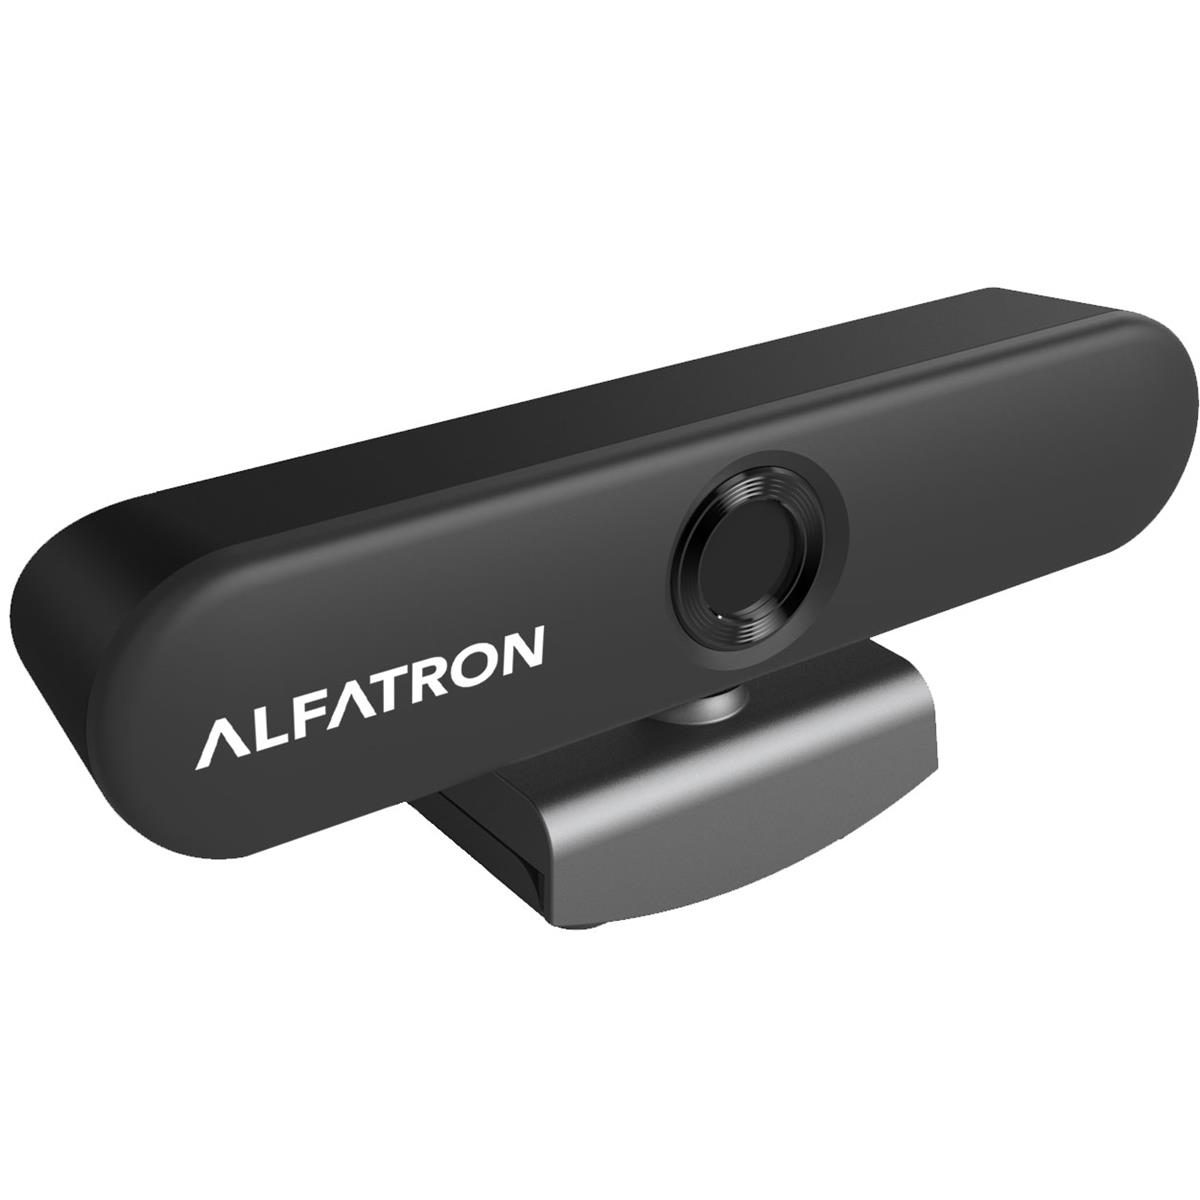 Image of Alfatron ALF-CAM200 USB Fixed-Angle 1080p Web Camera with Built-In Microphone